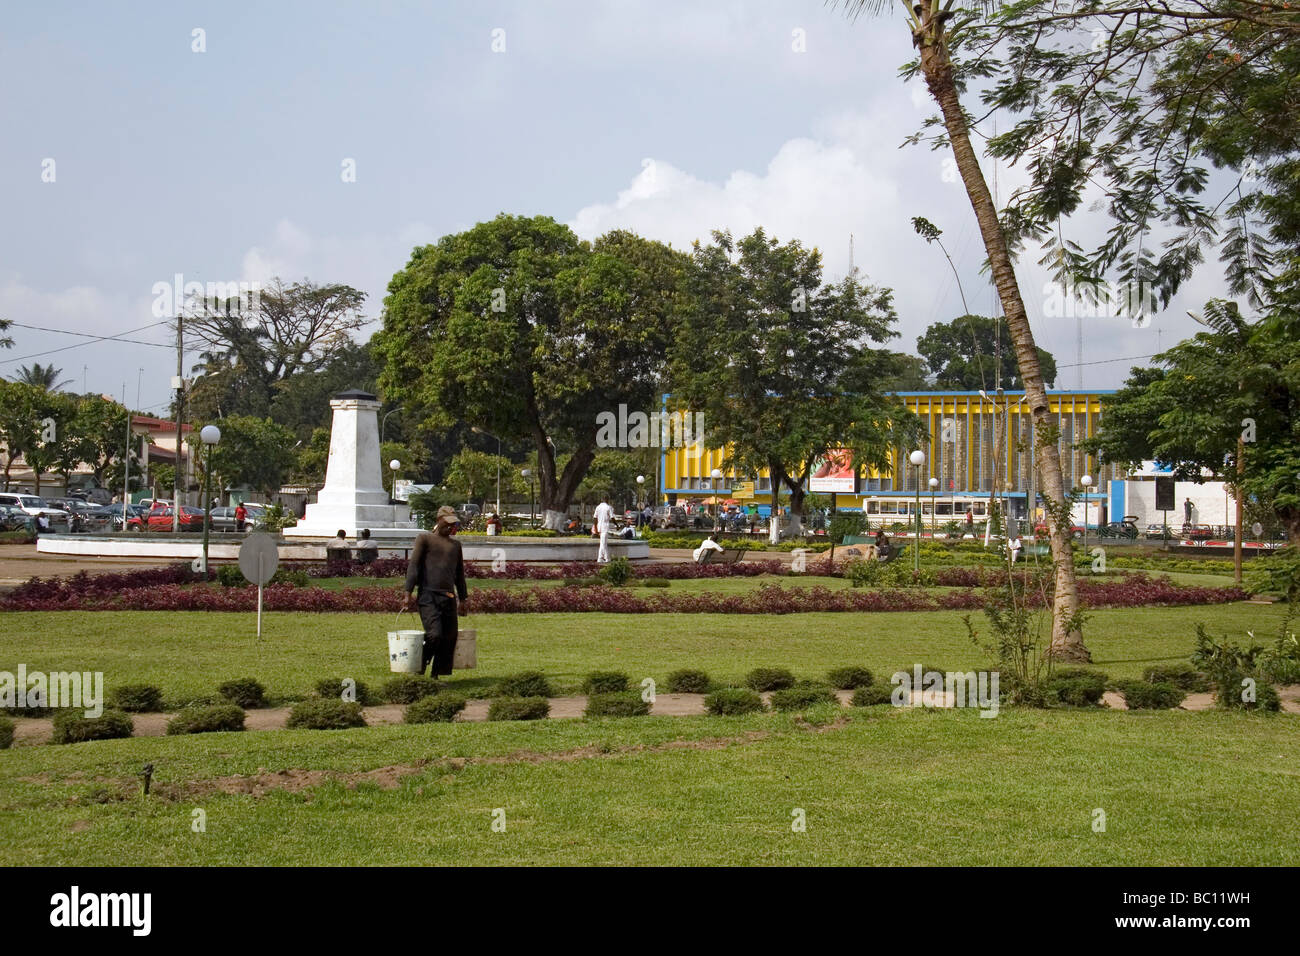 Place du Gouvernement Small park area in centre of Bonanjo administrative district Douala Cameroon West Africa Stock Photo